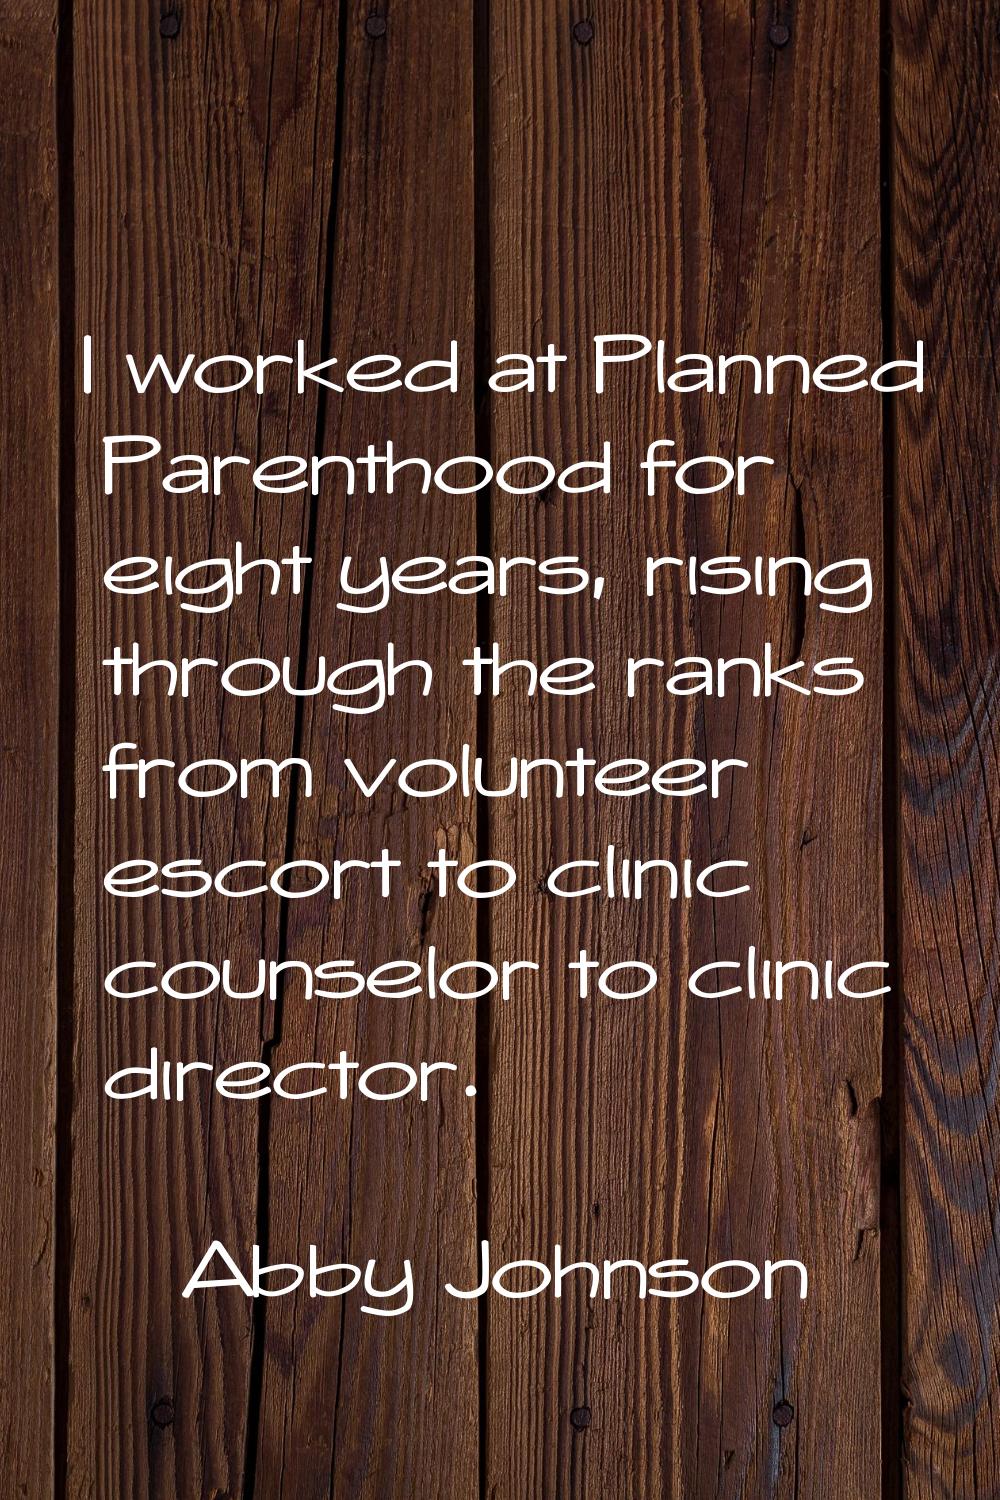 I worked at Planned Parenthood for eight years, rising through the ranks from volunteer escort to c